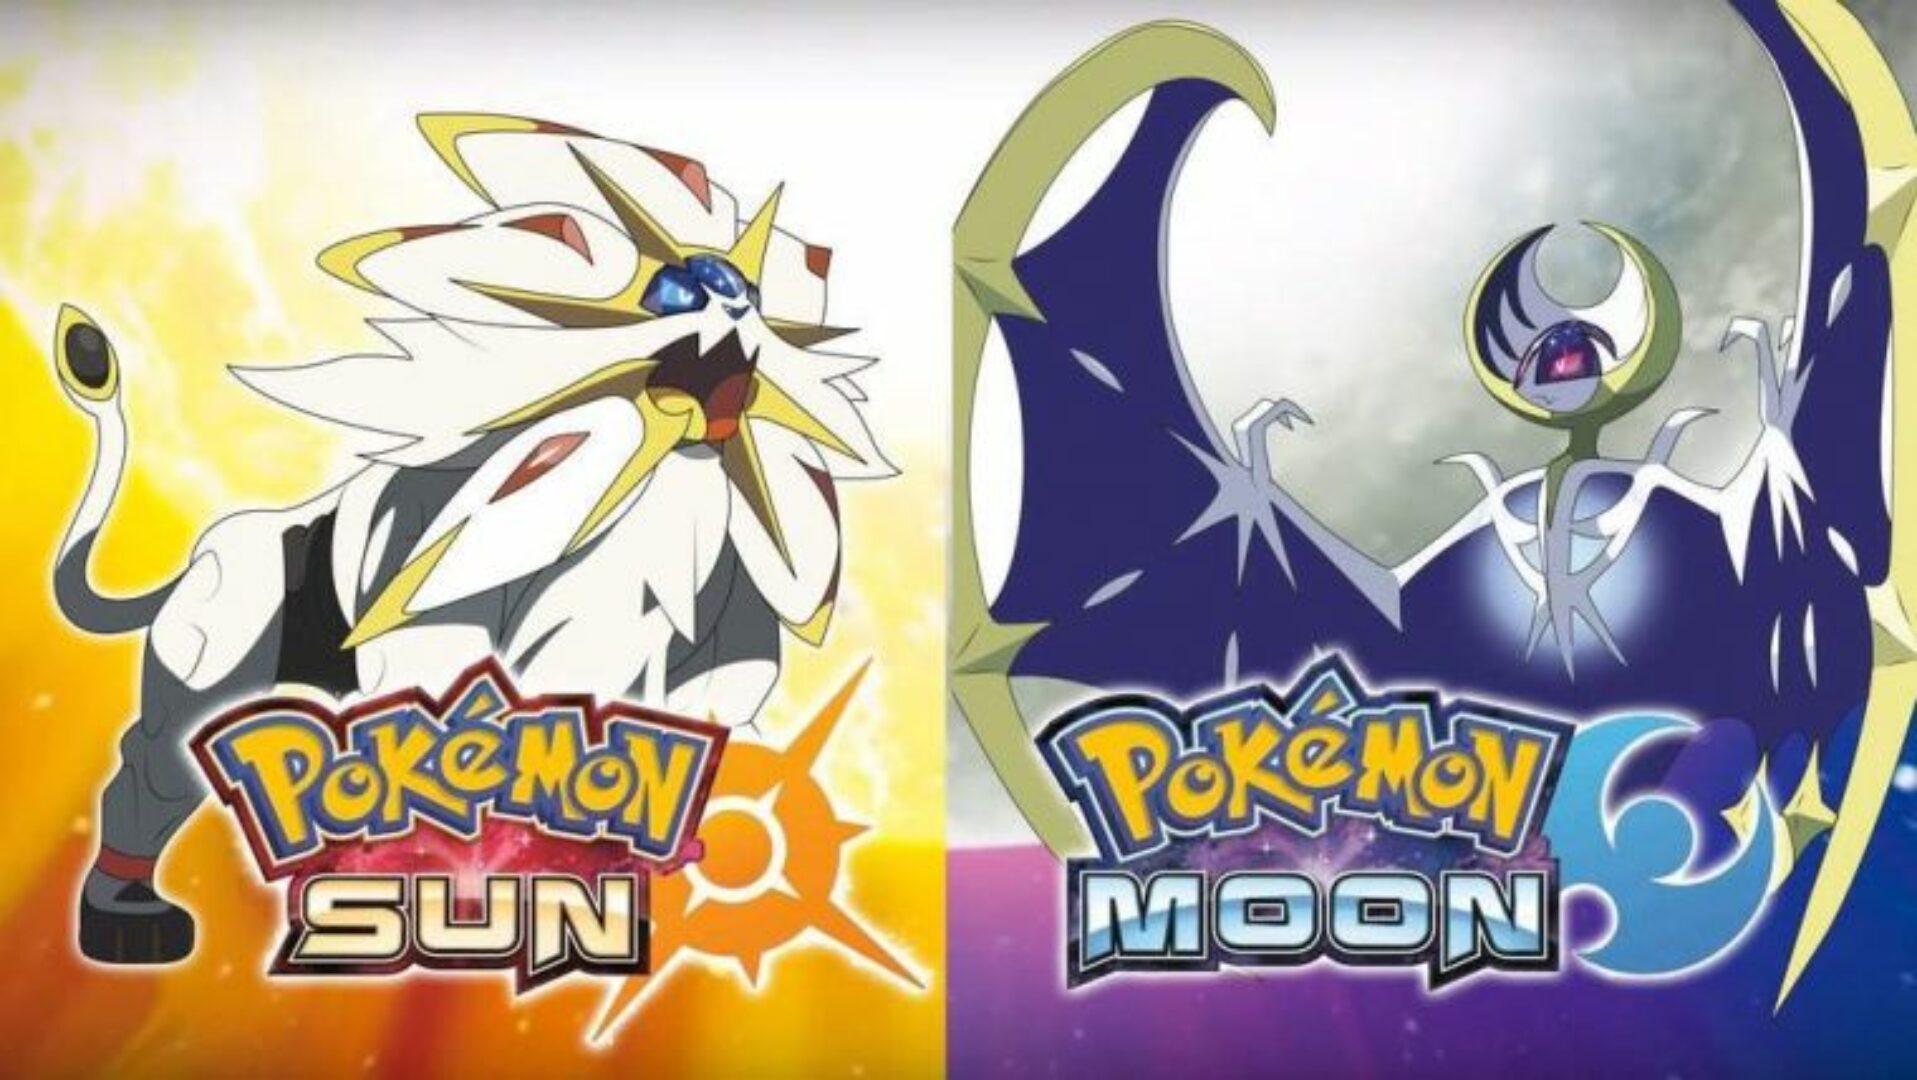 New Team and Pokemon Revealed For Pokemon Sun and Moon!